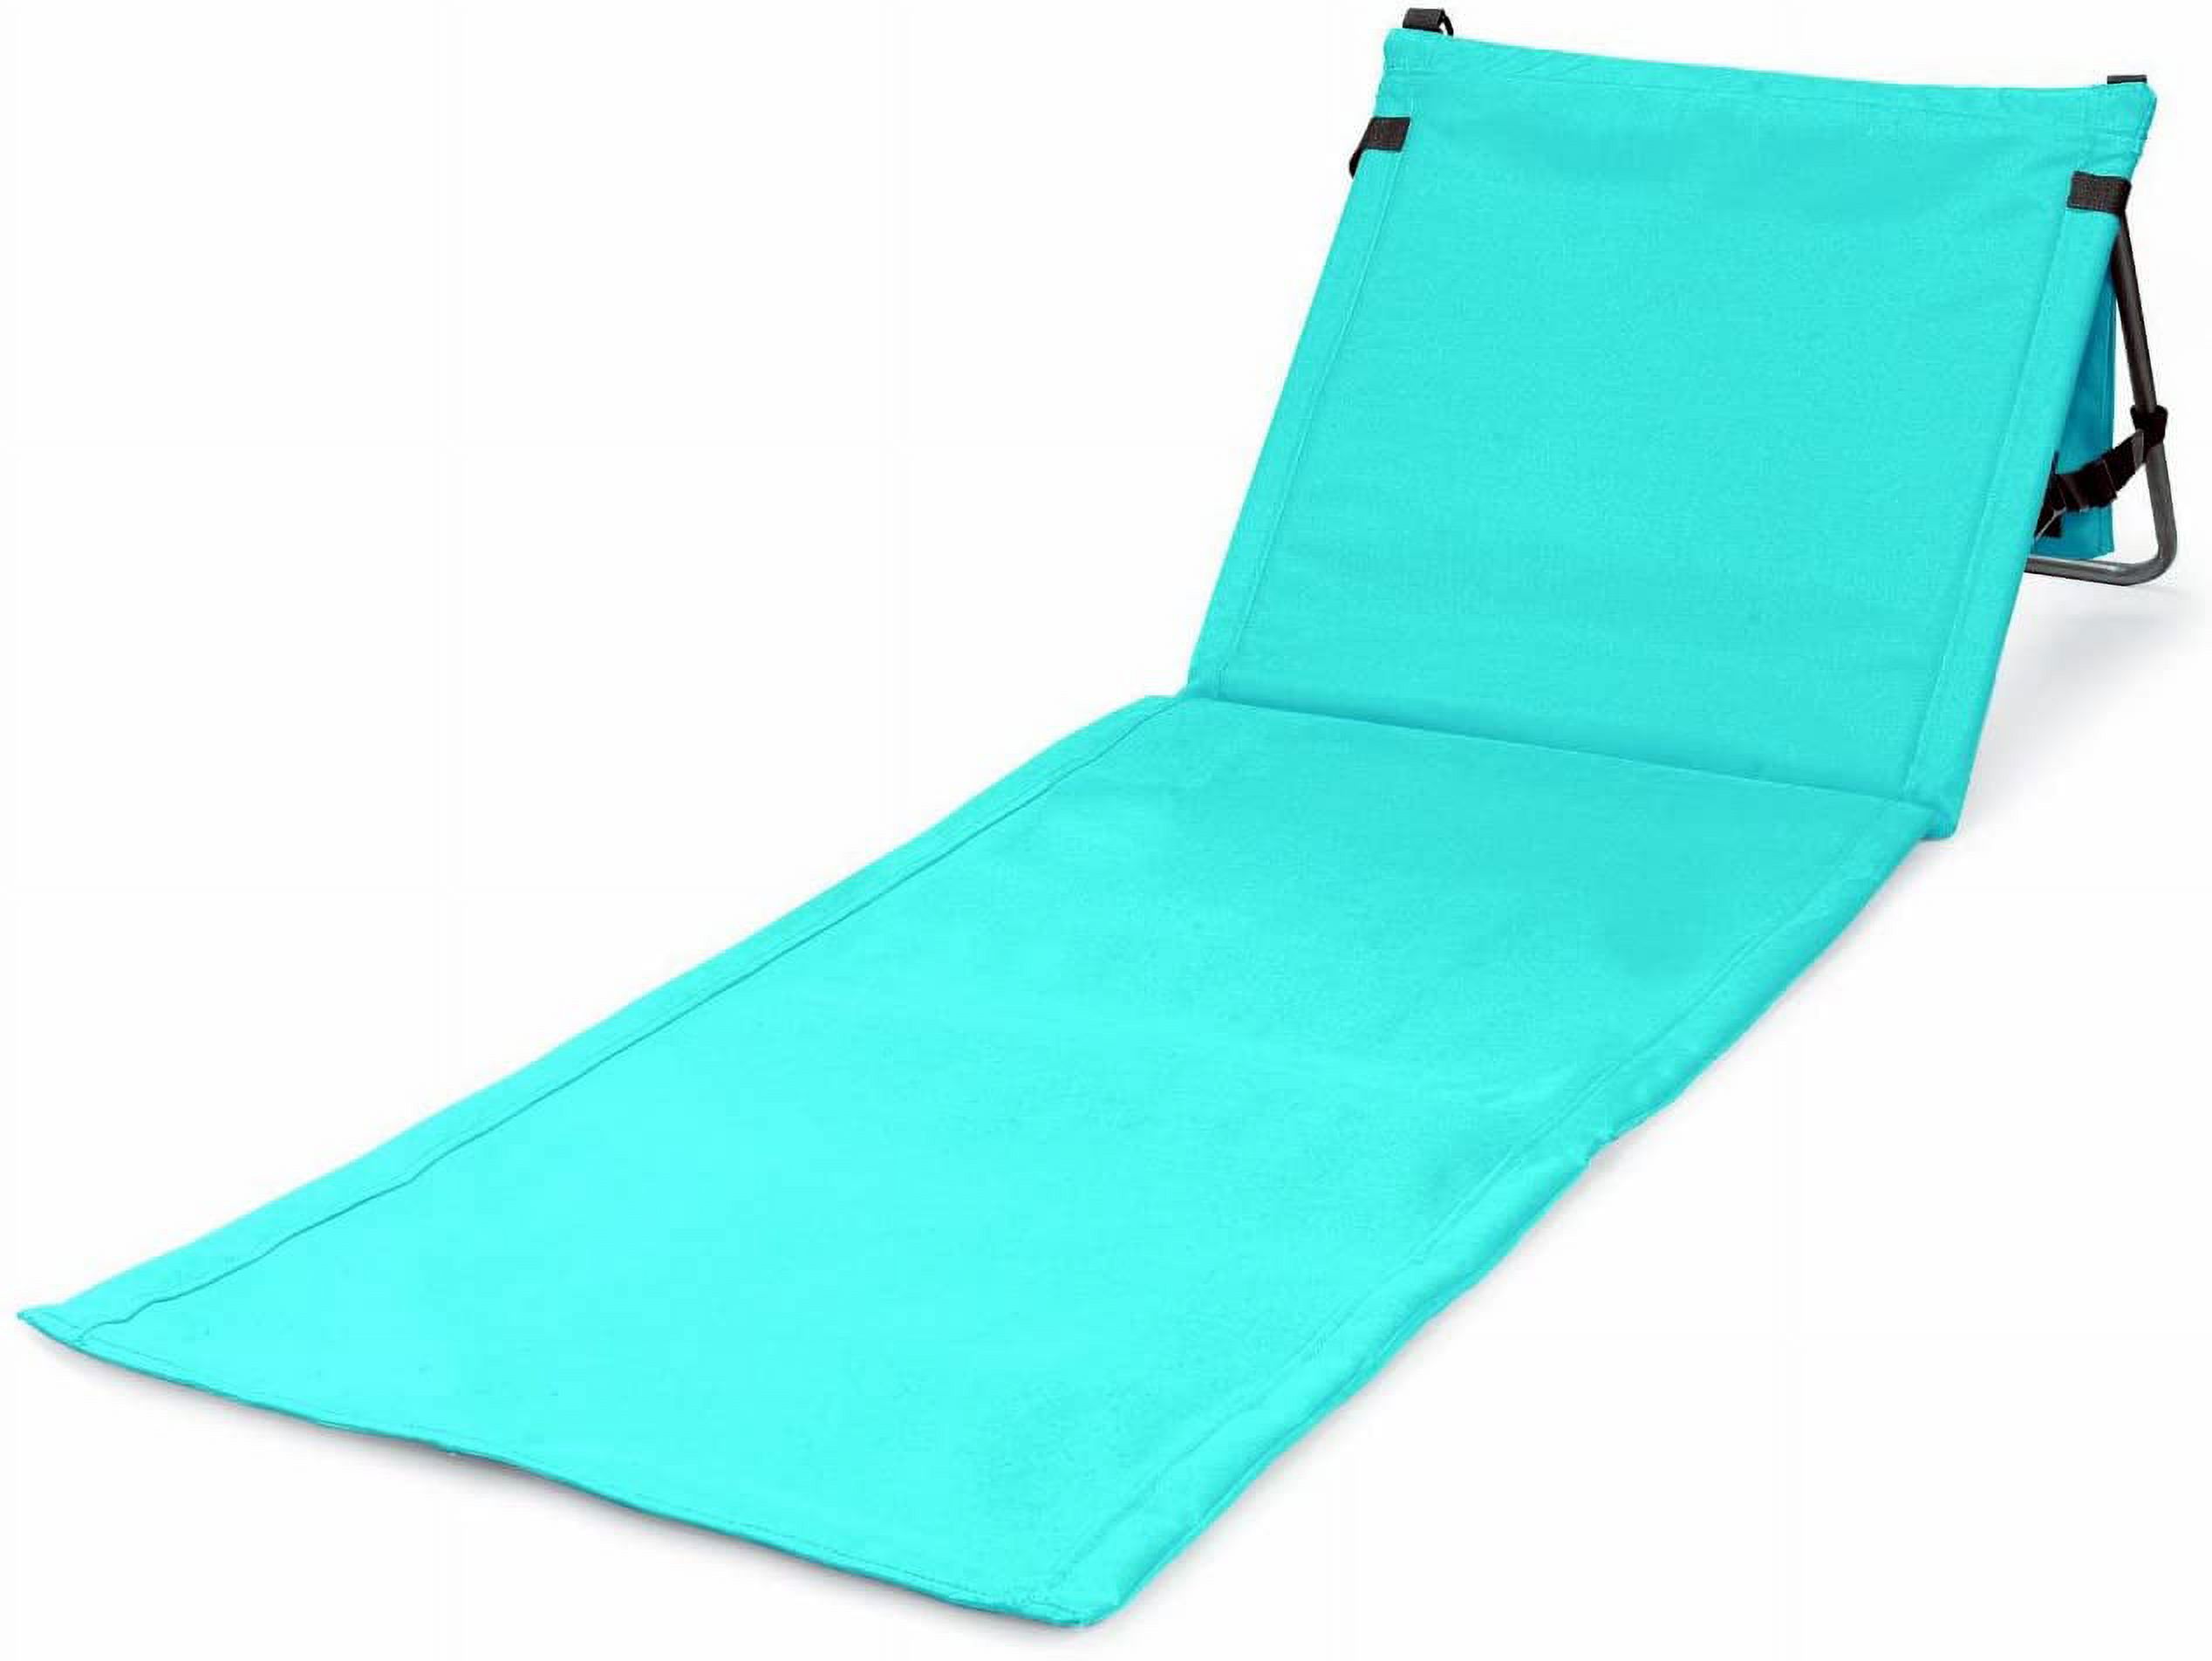 Bo-Toys Portable Beach Mat Padded Lounge Chair and Tote (Plain Blue) - image 4 of 10